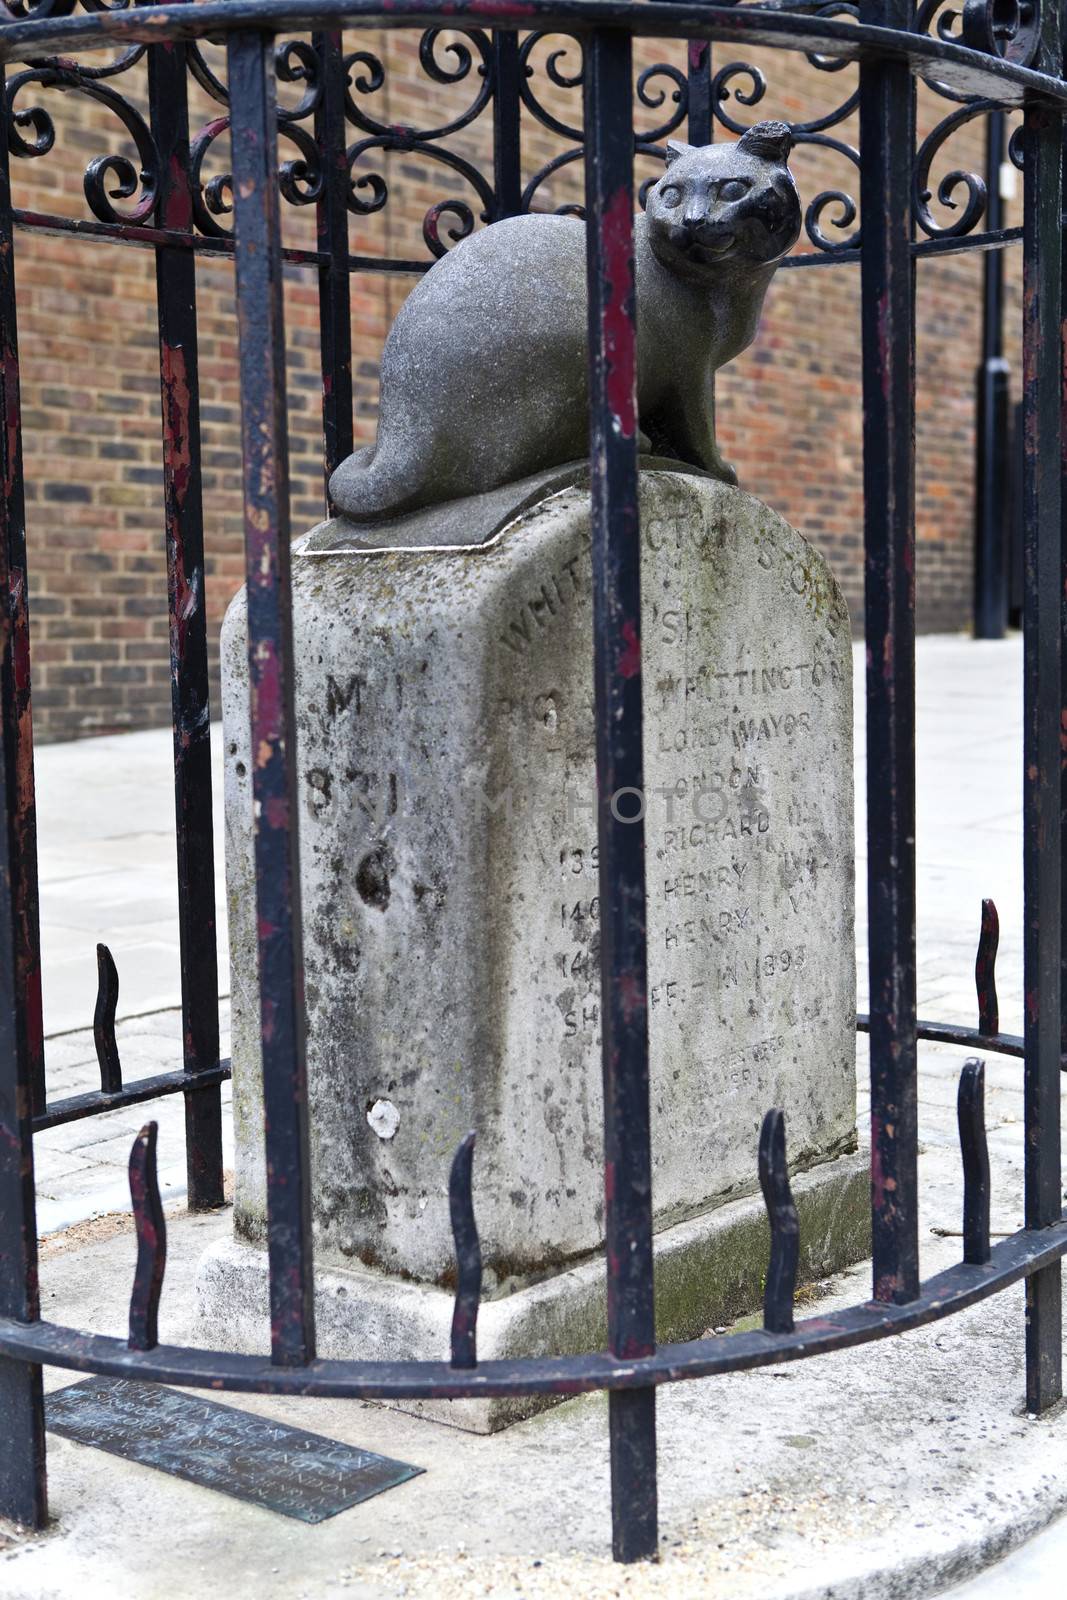 The Whittington Memorial Stone in Highgate, London.  This marks the spot that Dick Whittington is said to have heard the Bow Bells predicting his fortune.